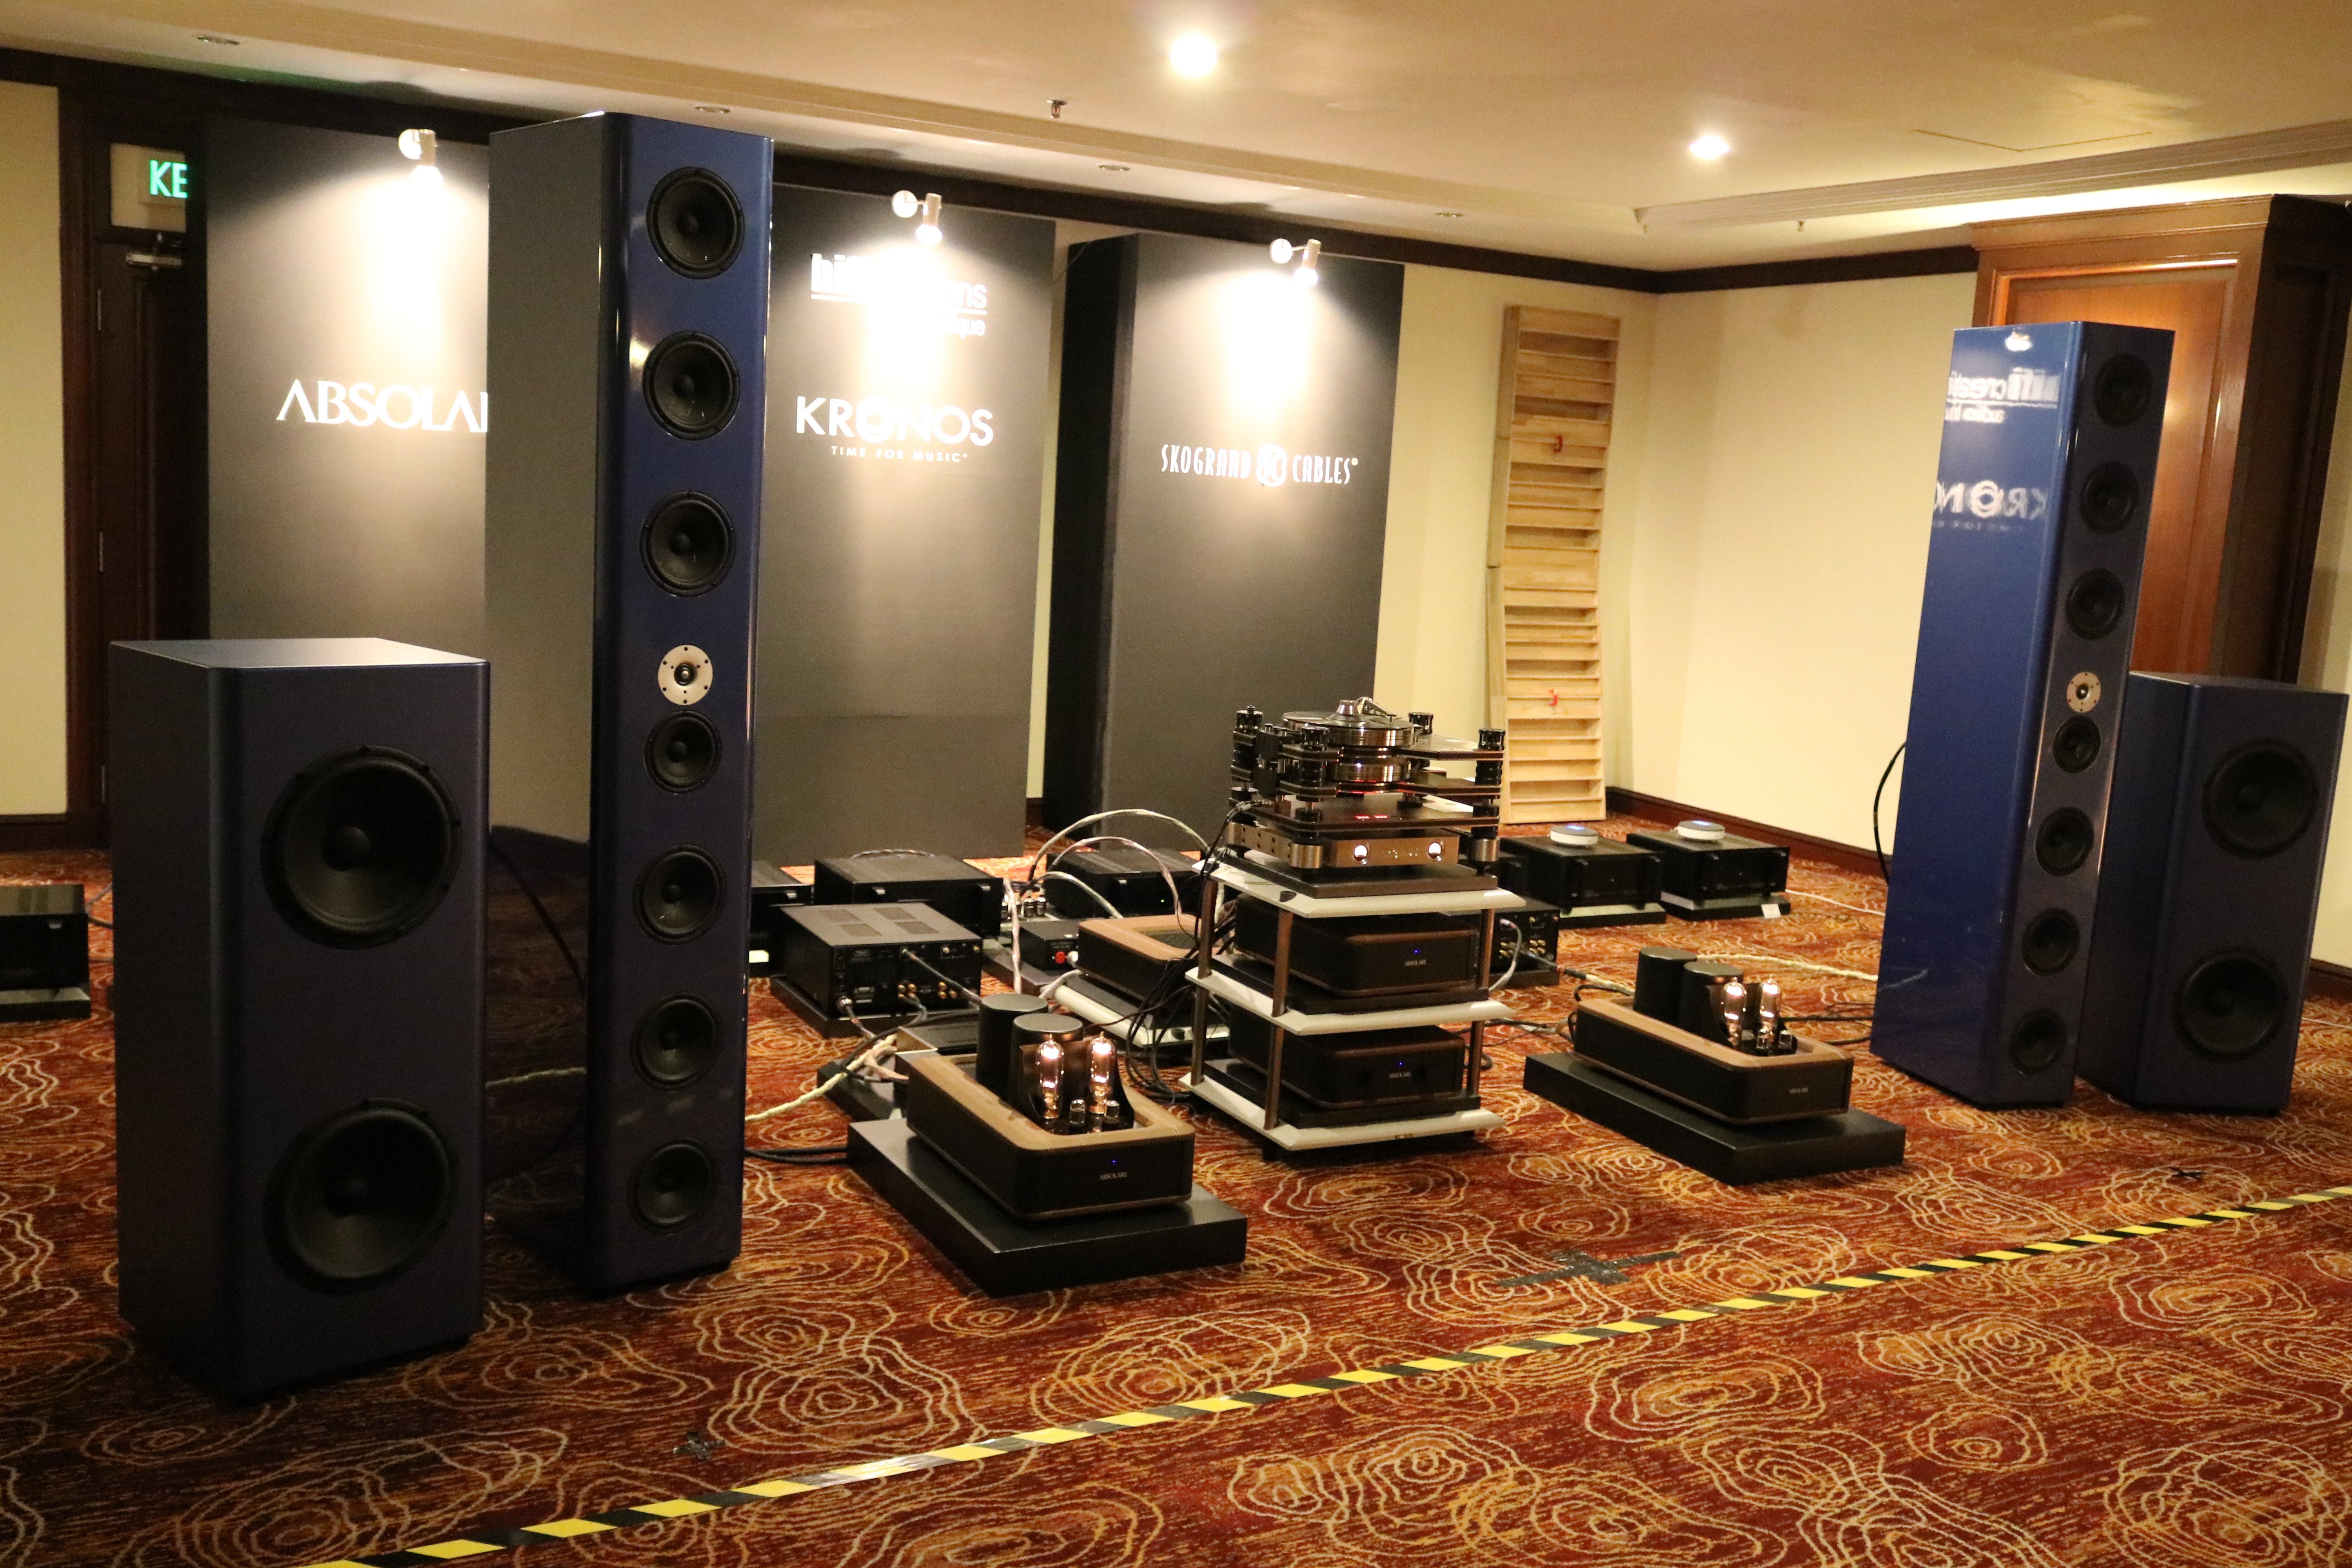 Ocean Five speakers, Absolare amps and Kronos Pro turntable in hifi creations' room.